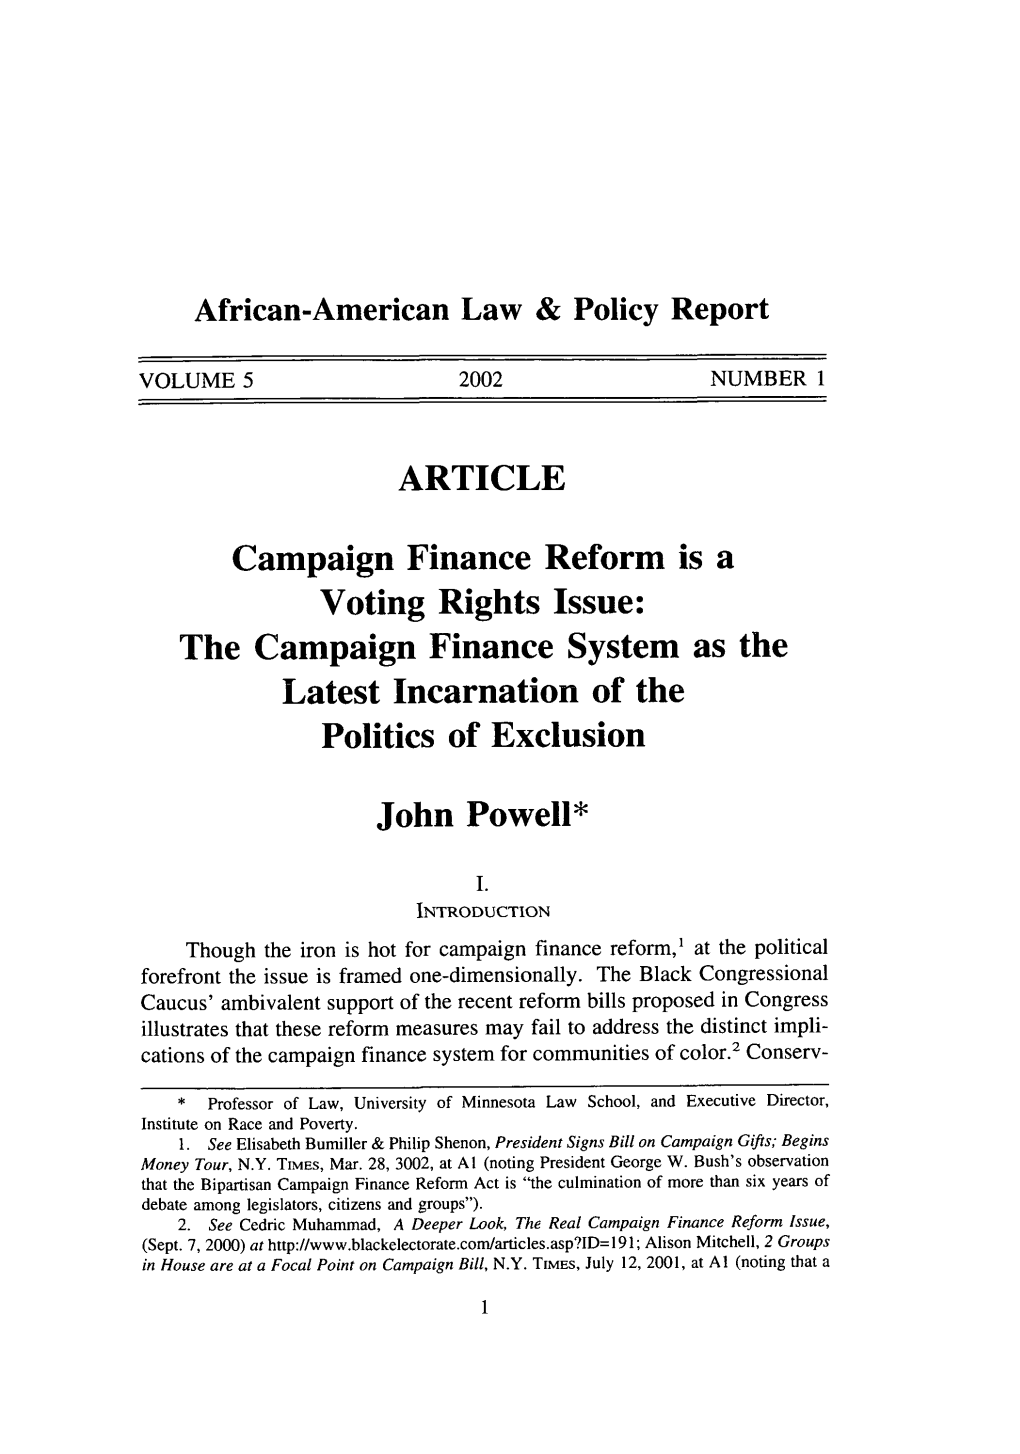 Campaign Finance Reform Is a Voting Rights Issue: the Campaign Finance System As the Latest Incarnation of the Politics of Exclusion